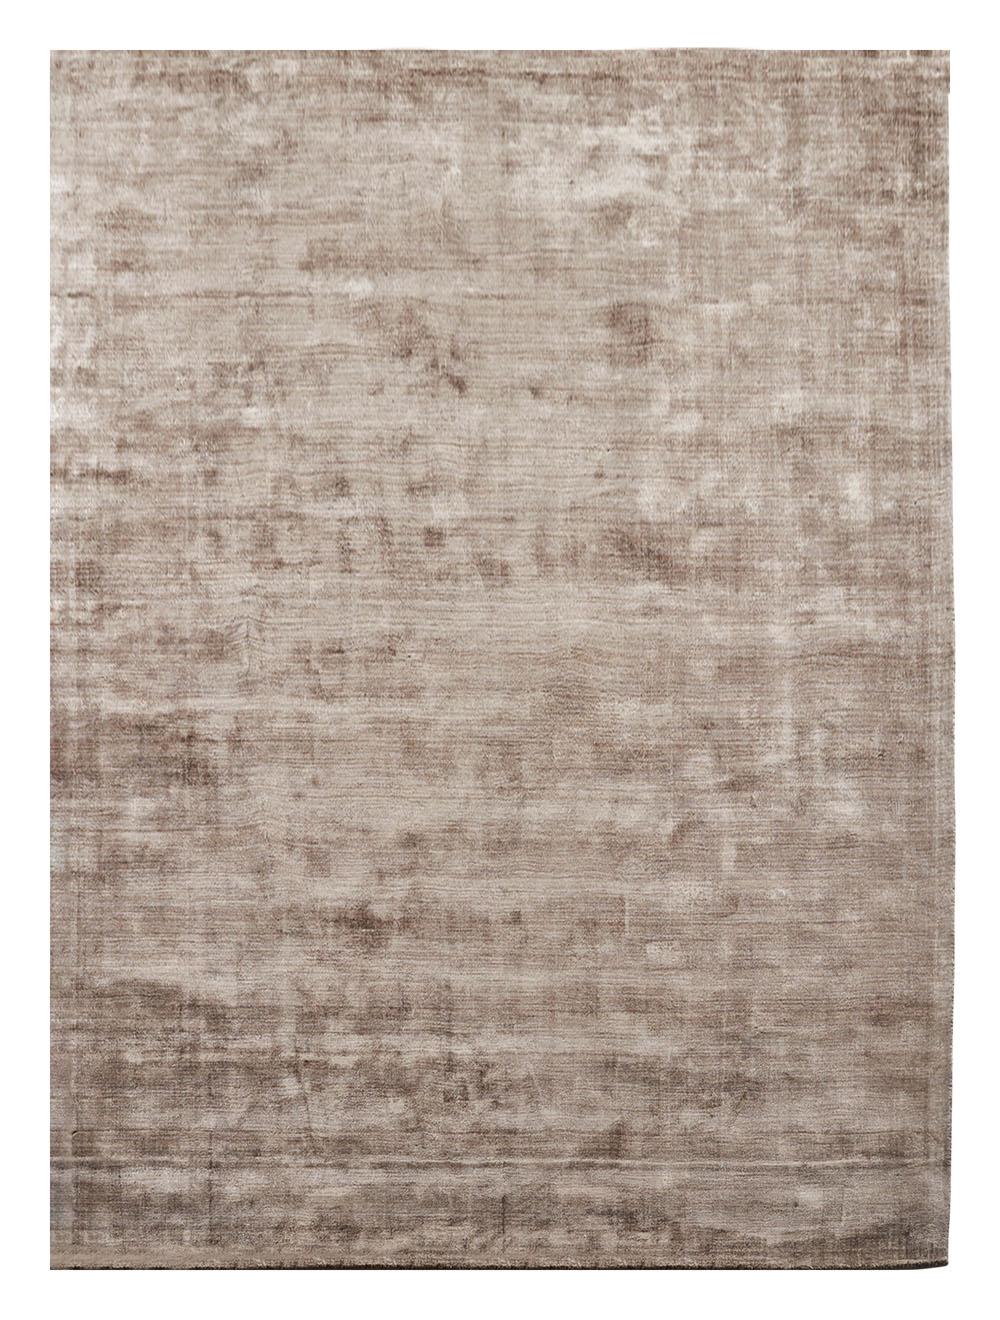 Nougat brown Karma Carpet by Massimo Copenhagen
Handwoven
Materials: 100% Recycled Bamboo
Dimensions: W 250 x H 350 cm
Available colors: light grey, nougat brown, washed blue, and olive green.
Other dimensions are available: 160x230 cm, 200x300